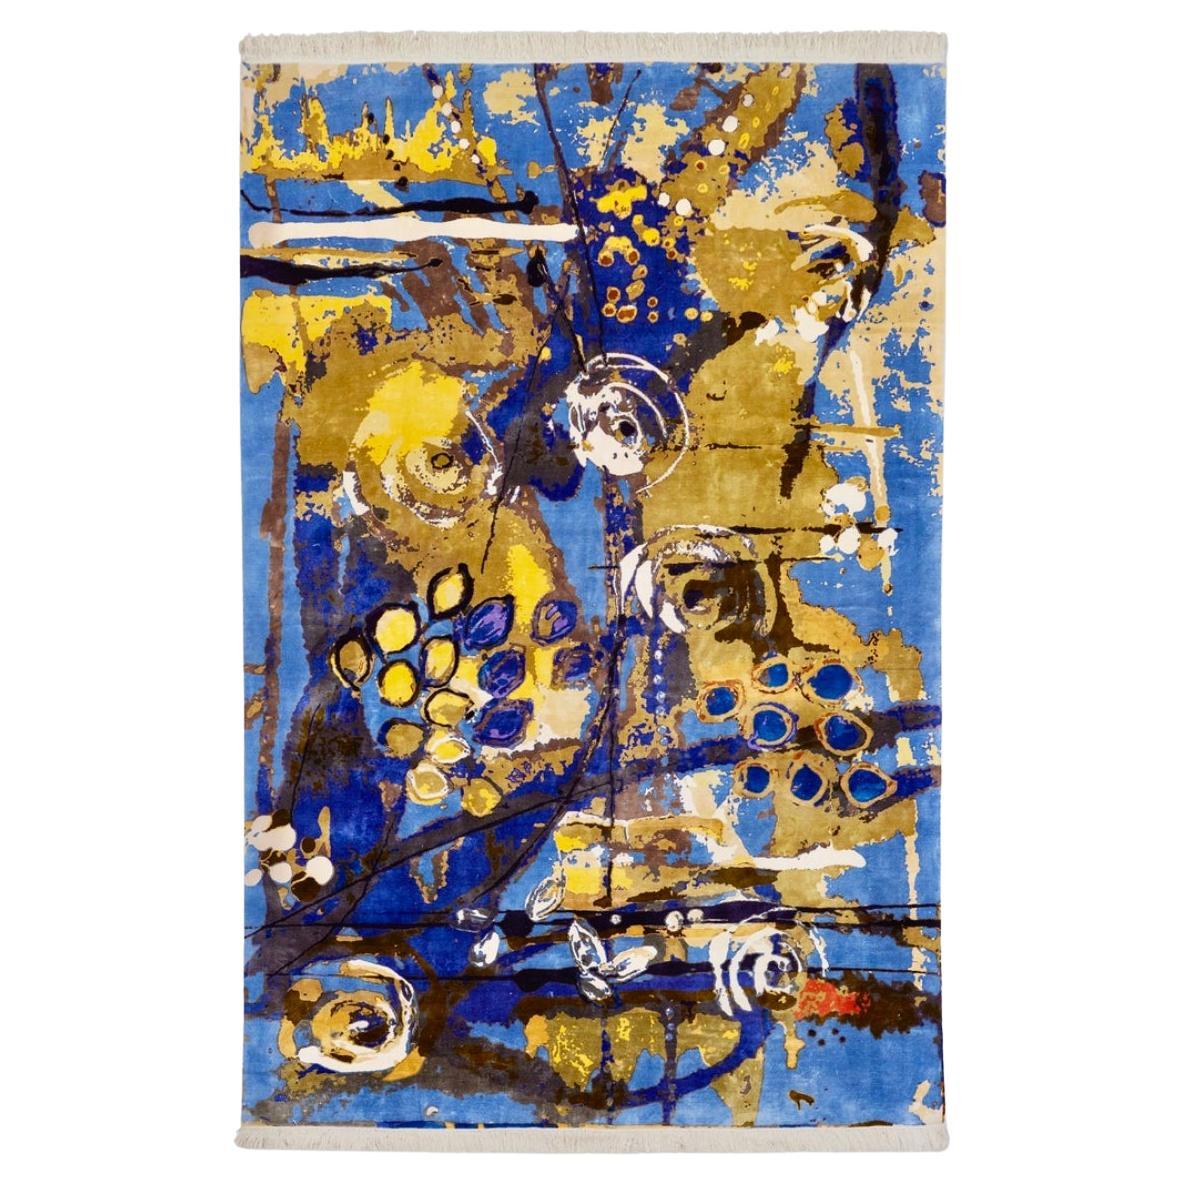 Handwoven silk rug designed by Dena Lawrence and woven in Kashmir.  Vibrant blue